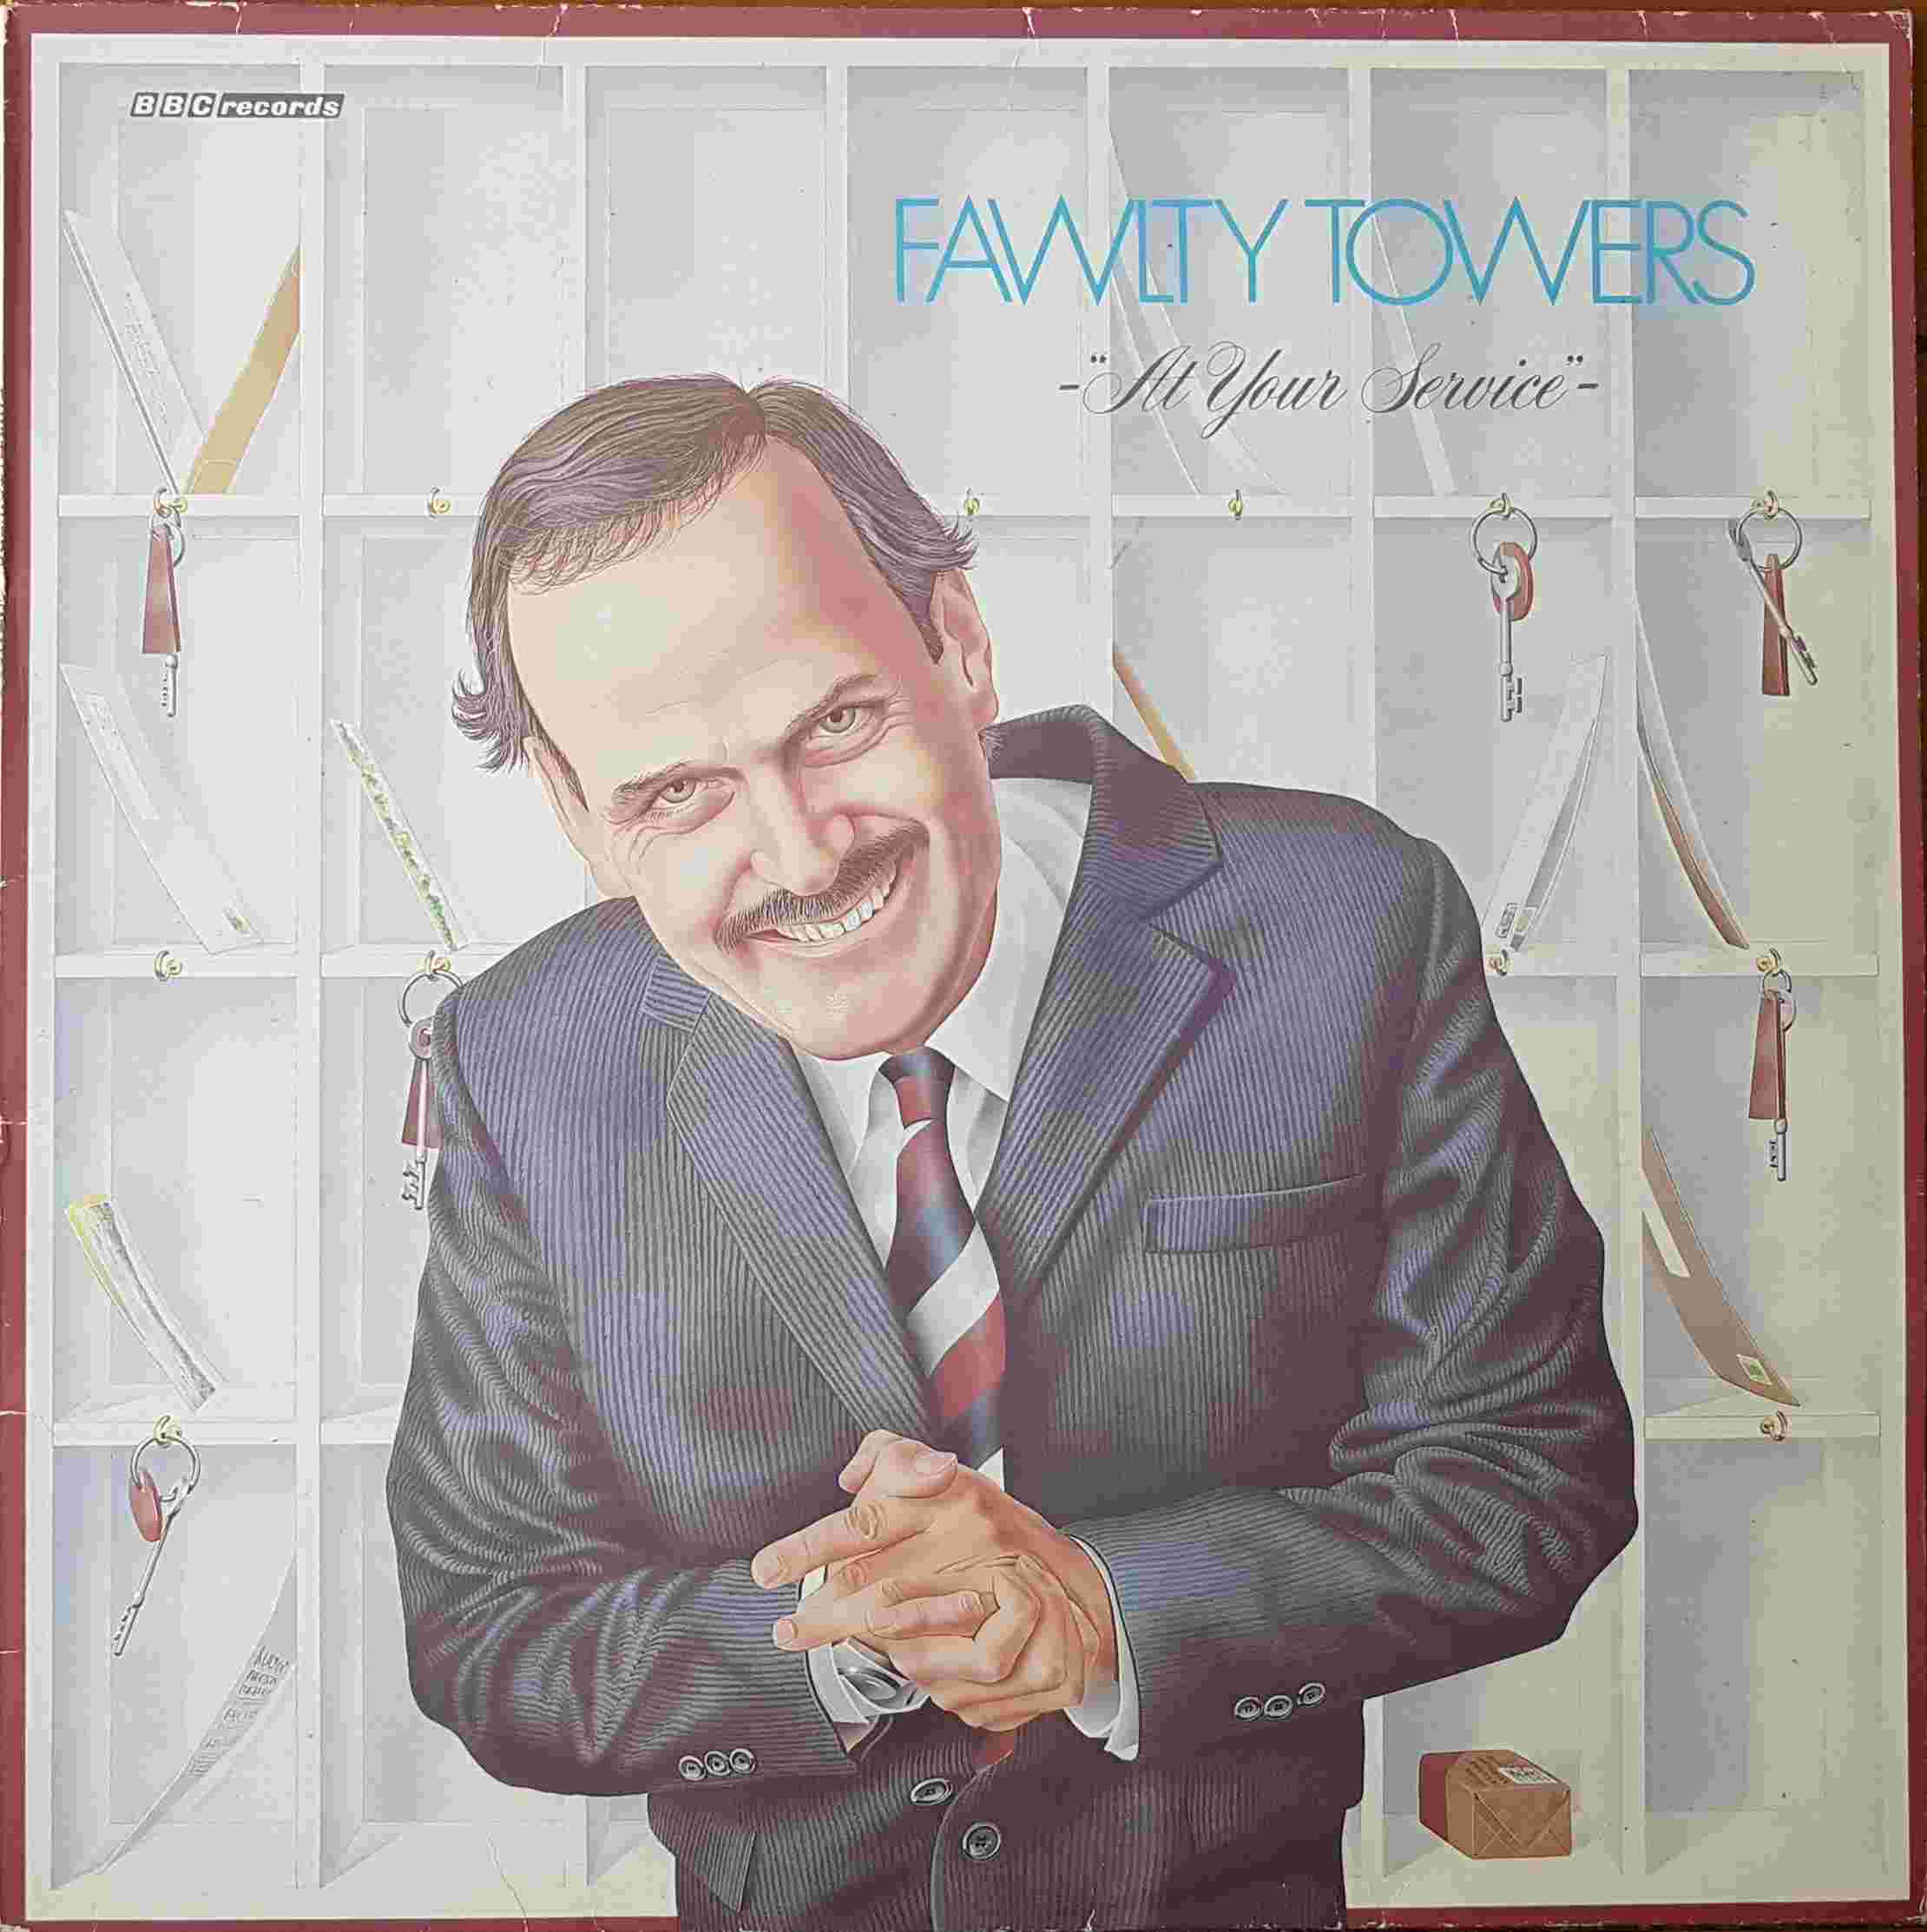 Picture of REB 449 Fawlty towers - At your service by artist John Cleese / Connie Booth from the BBC albums - Records and Tapes library